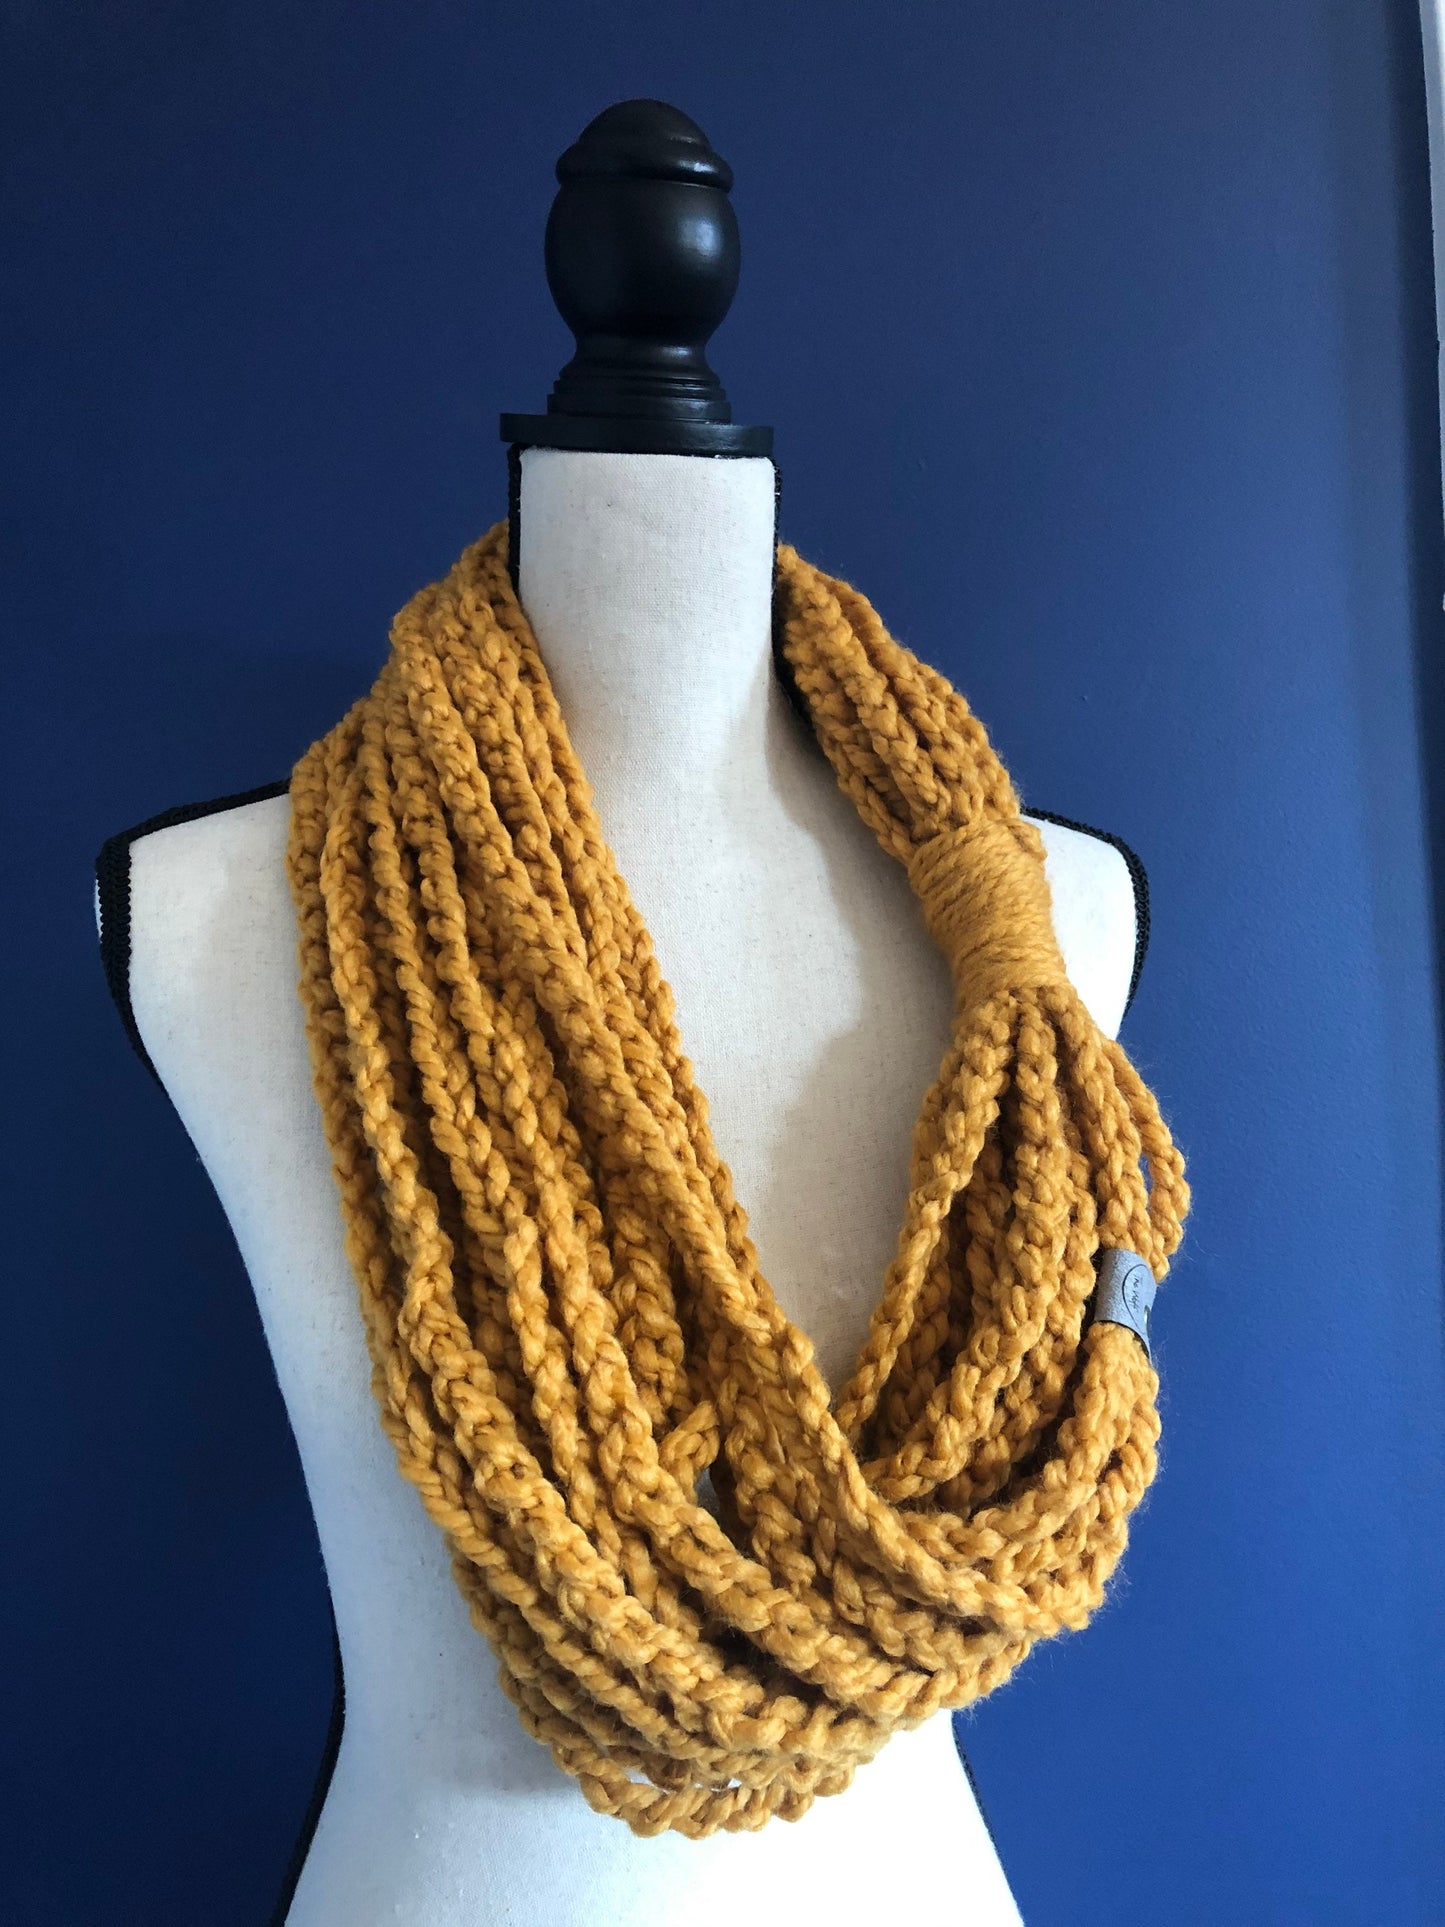 Mustard Yellow Women's Scarf. Knit Infinity Scarf. Golden Chain Scarf. Womens Knit Cowl. Braided Yellow Cowl.